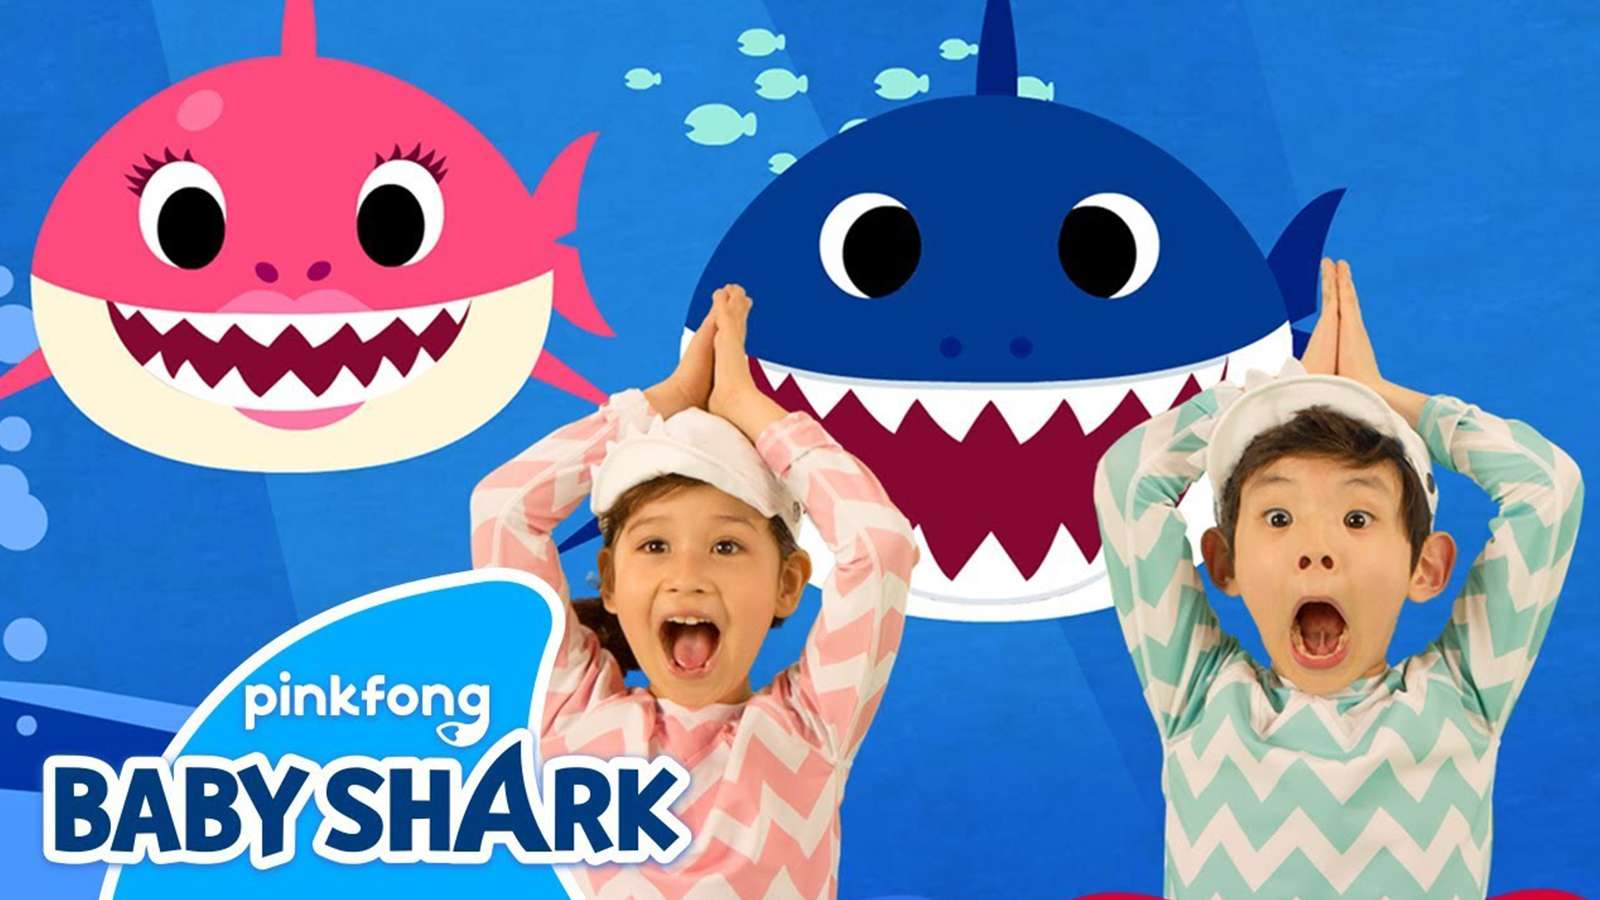 The story behind the astonishingly viral Baby Shark  video